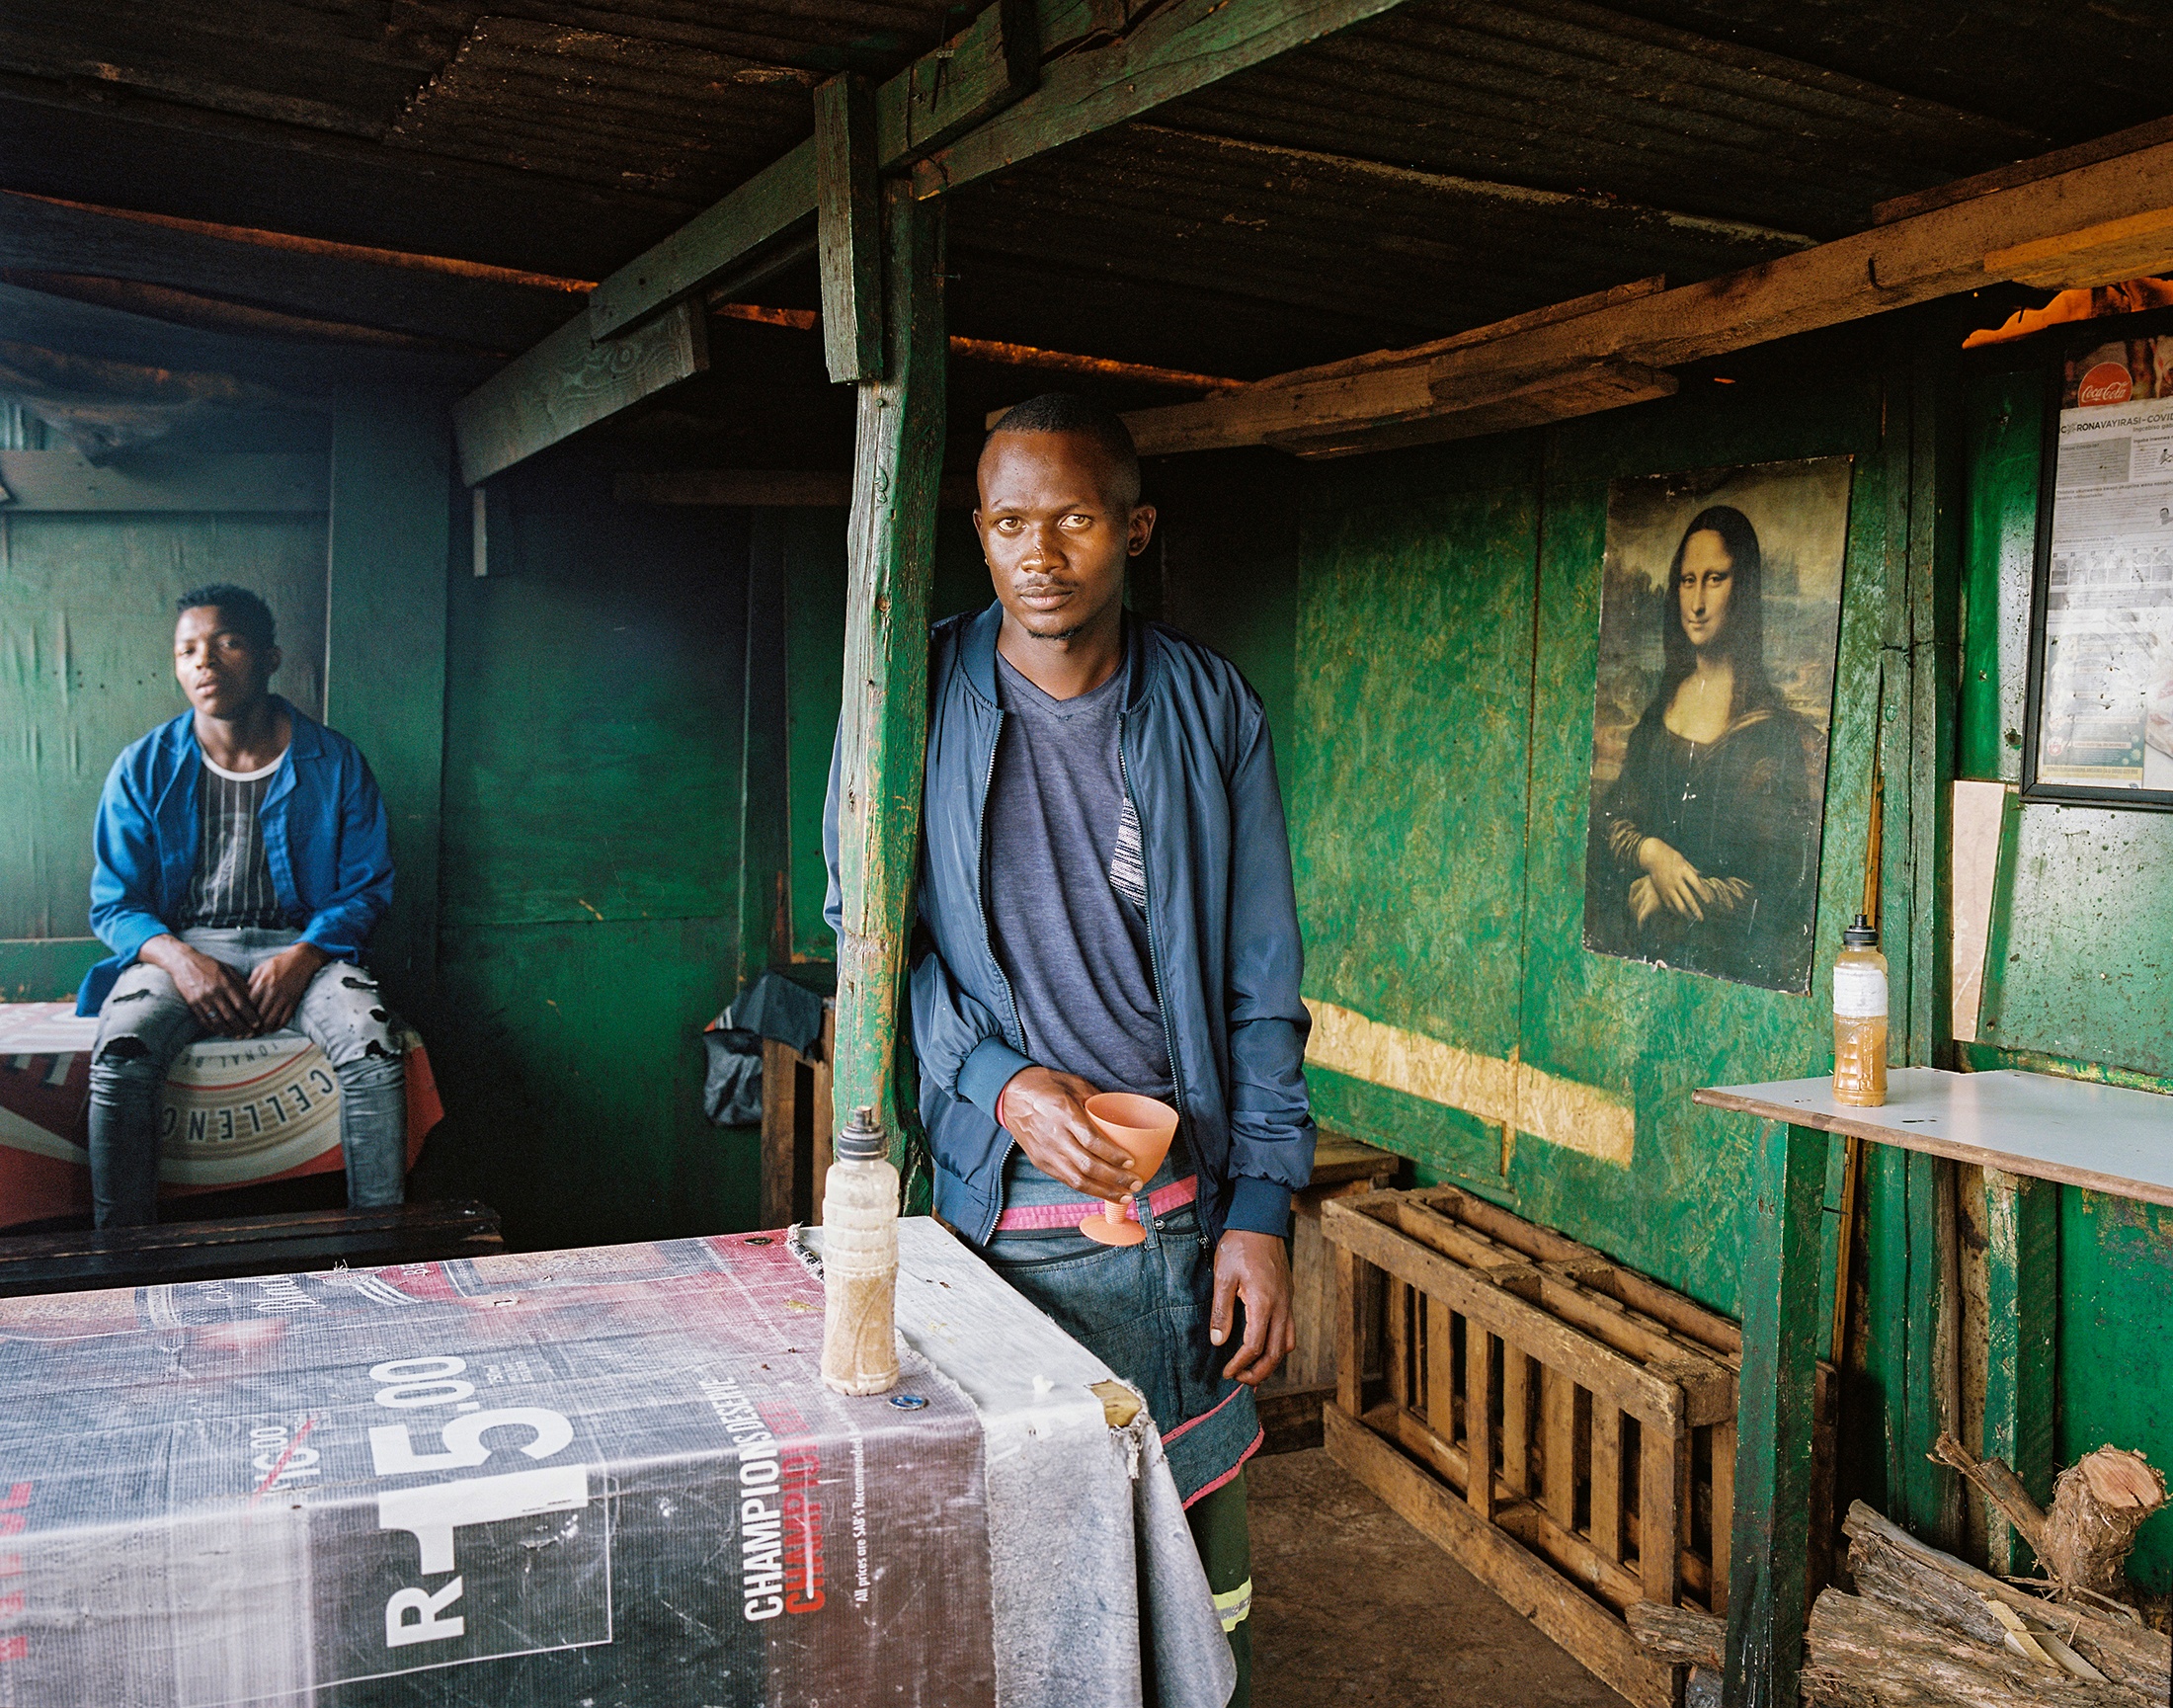 Lindokuhle Sobekwa's photograph 'Mona Lisa gaze' shows two individuals, one standing and one seated, in a building that features a print of Leonardo da Vinci's 'Mona Lisa' mounted on a wall.
